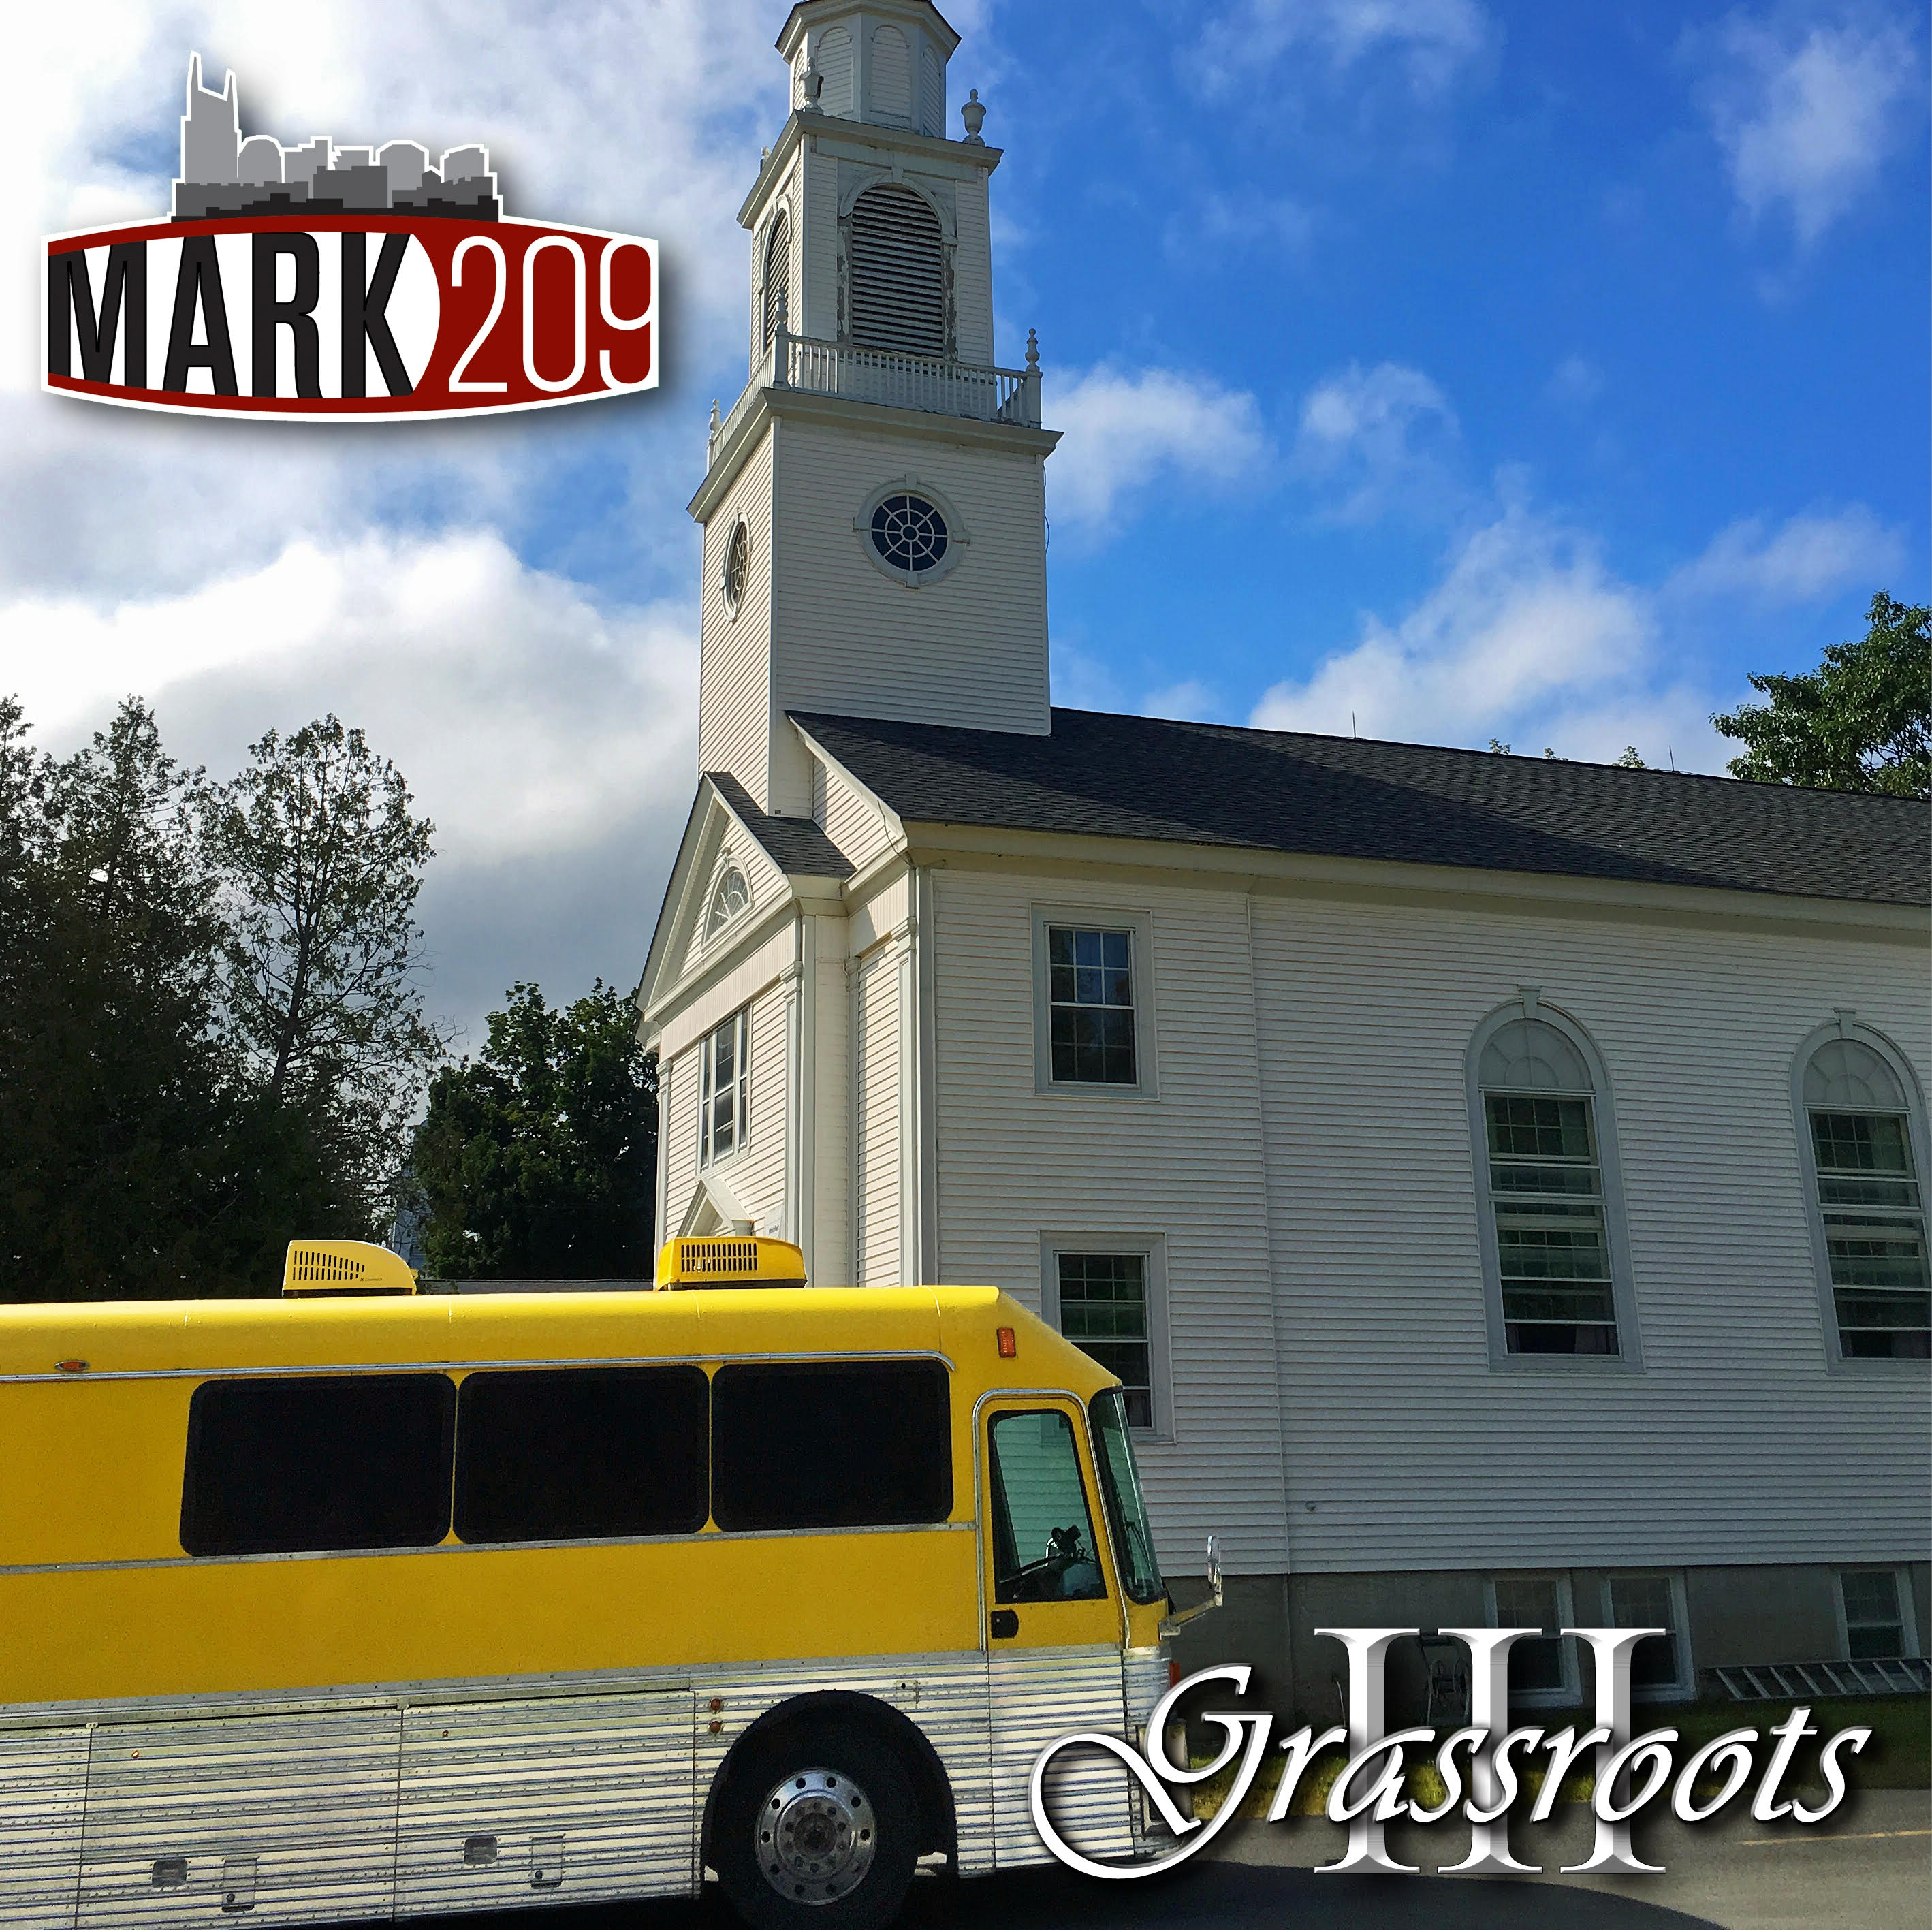 MARK209 announces release of new project Grassroots III